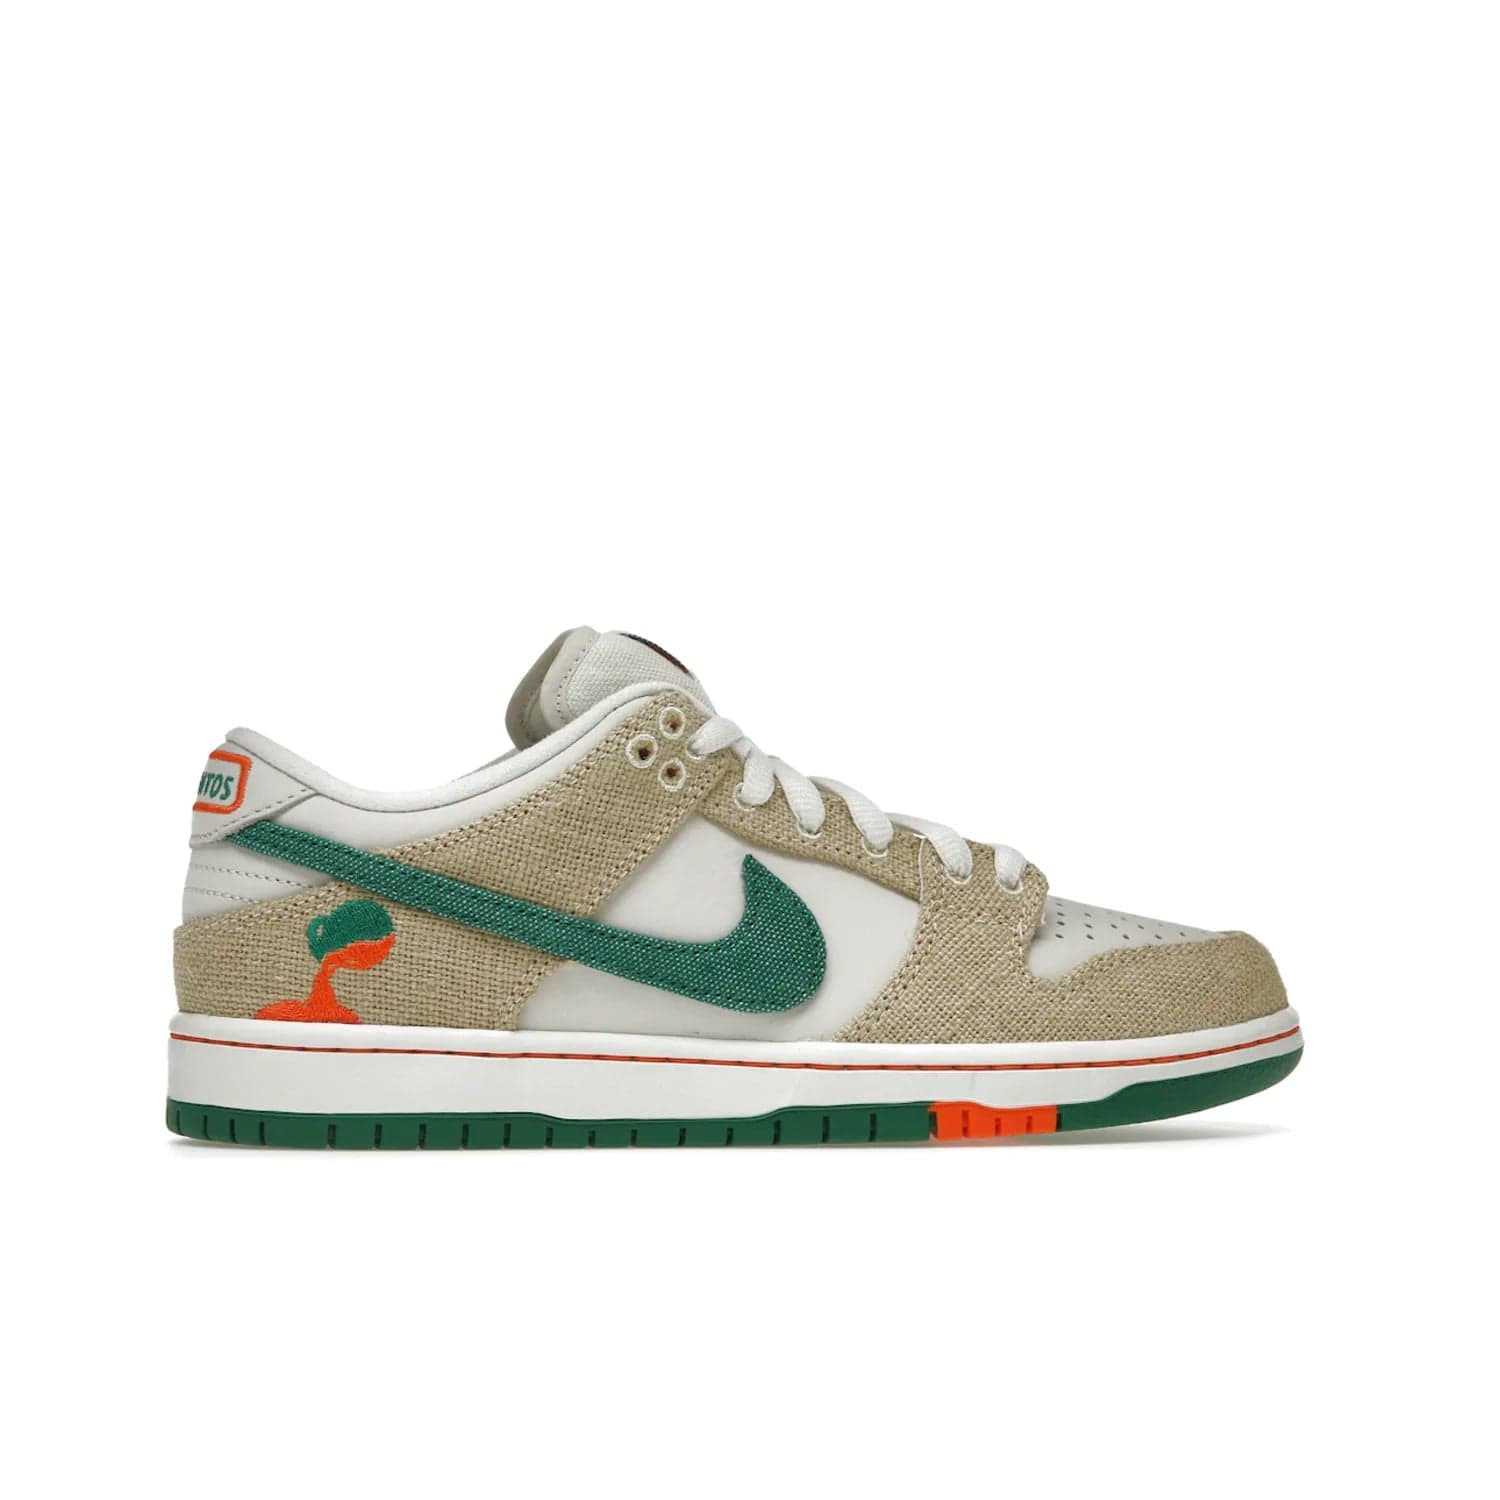 Nike SB Dunk Low Jarritos - Image 36 - Only at www.BallersClubKickz.com - Shop limited edition Nike SB Dunk Low Jarritos! Crafted with white leather and tear-away canvas materials with green accents. Includes orange, green, and white laces to customize your look. Available now.